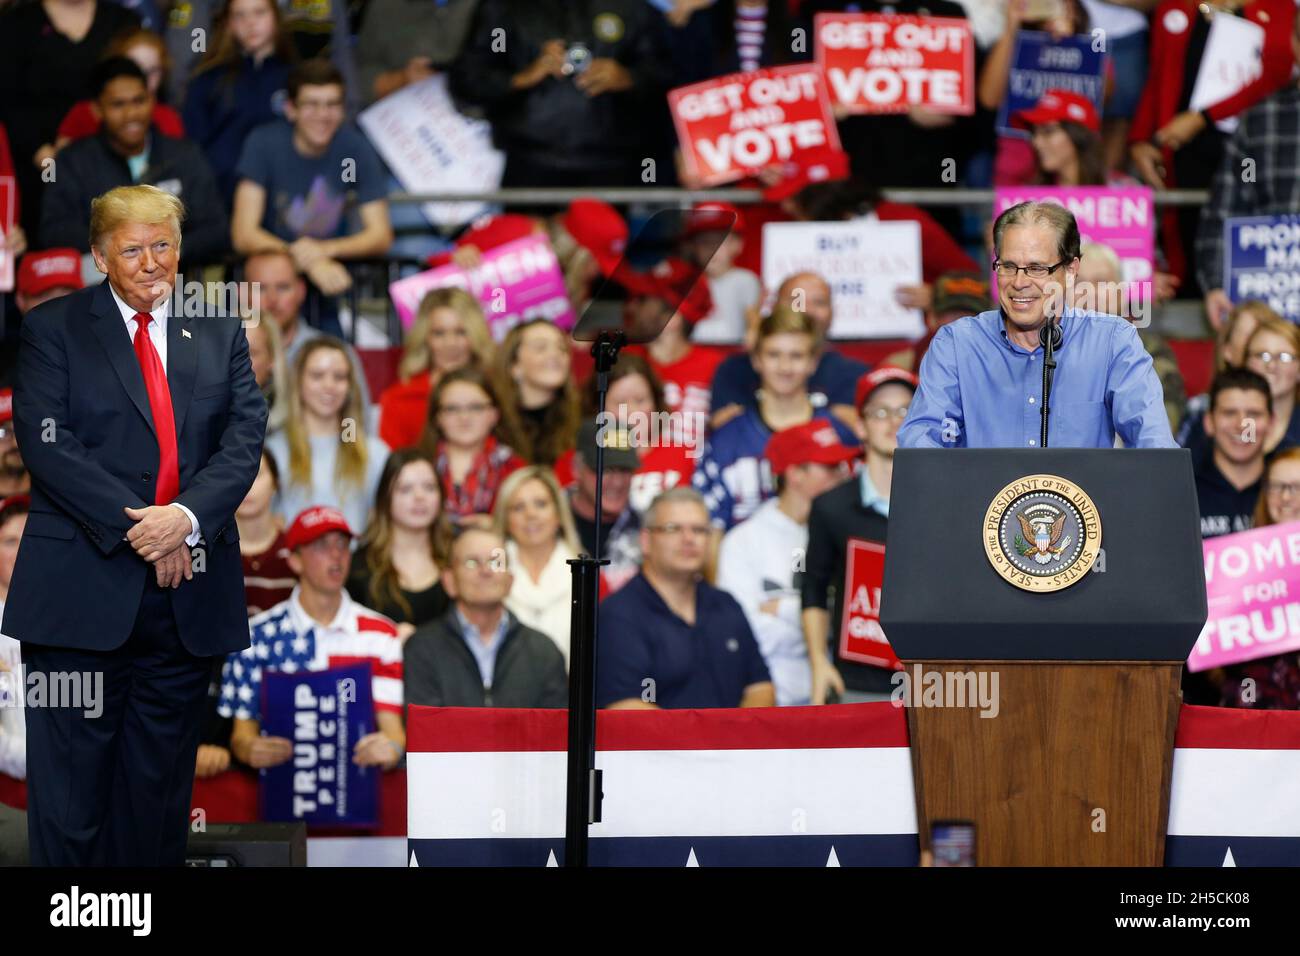 11052018 - Fort Wayne, Indiana, USA: Mike Braun, who is running for senate, appears onstage with United States President Donald J. Trump who is campaigning for Indiana congressional candidates during a Make America Great Again! rally at the Allen County War Memorial Coliseum in Fort Wayne, Indiana. Stock Photo